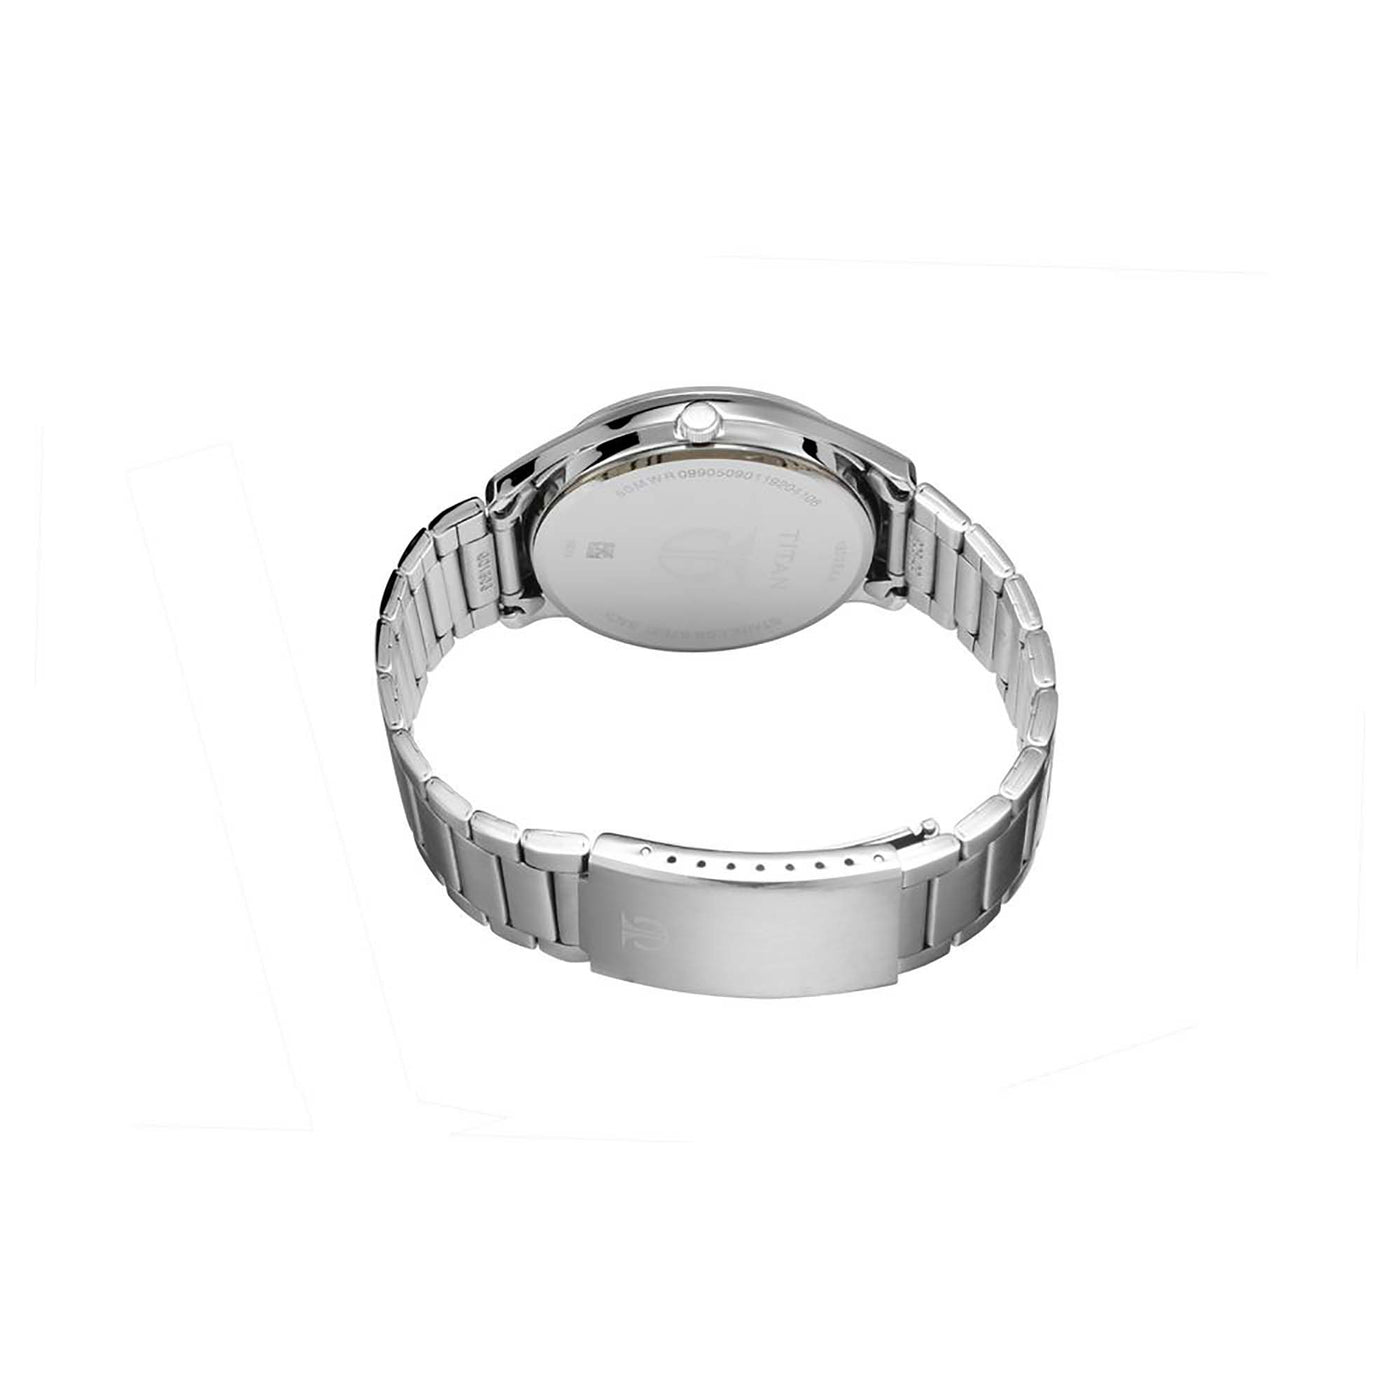 Neo 3-Hand 42mm Stainless Steel Band